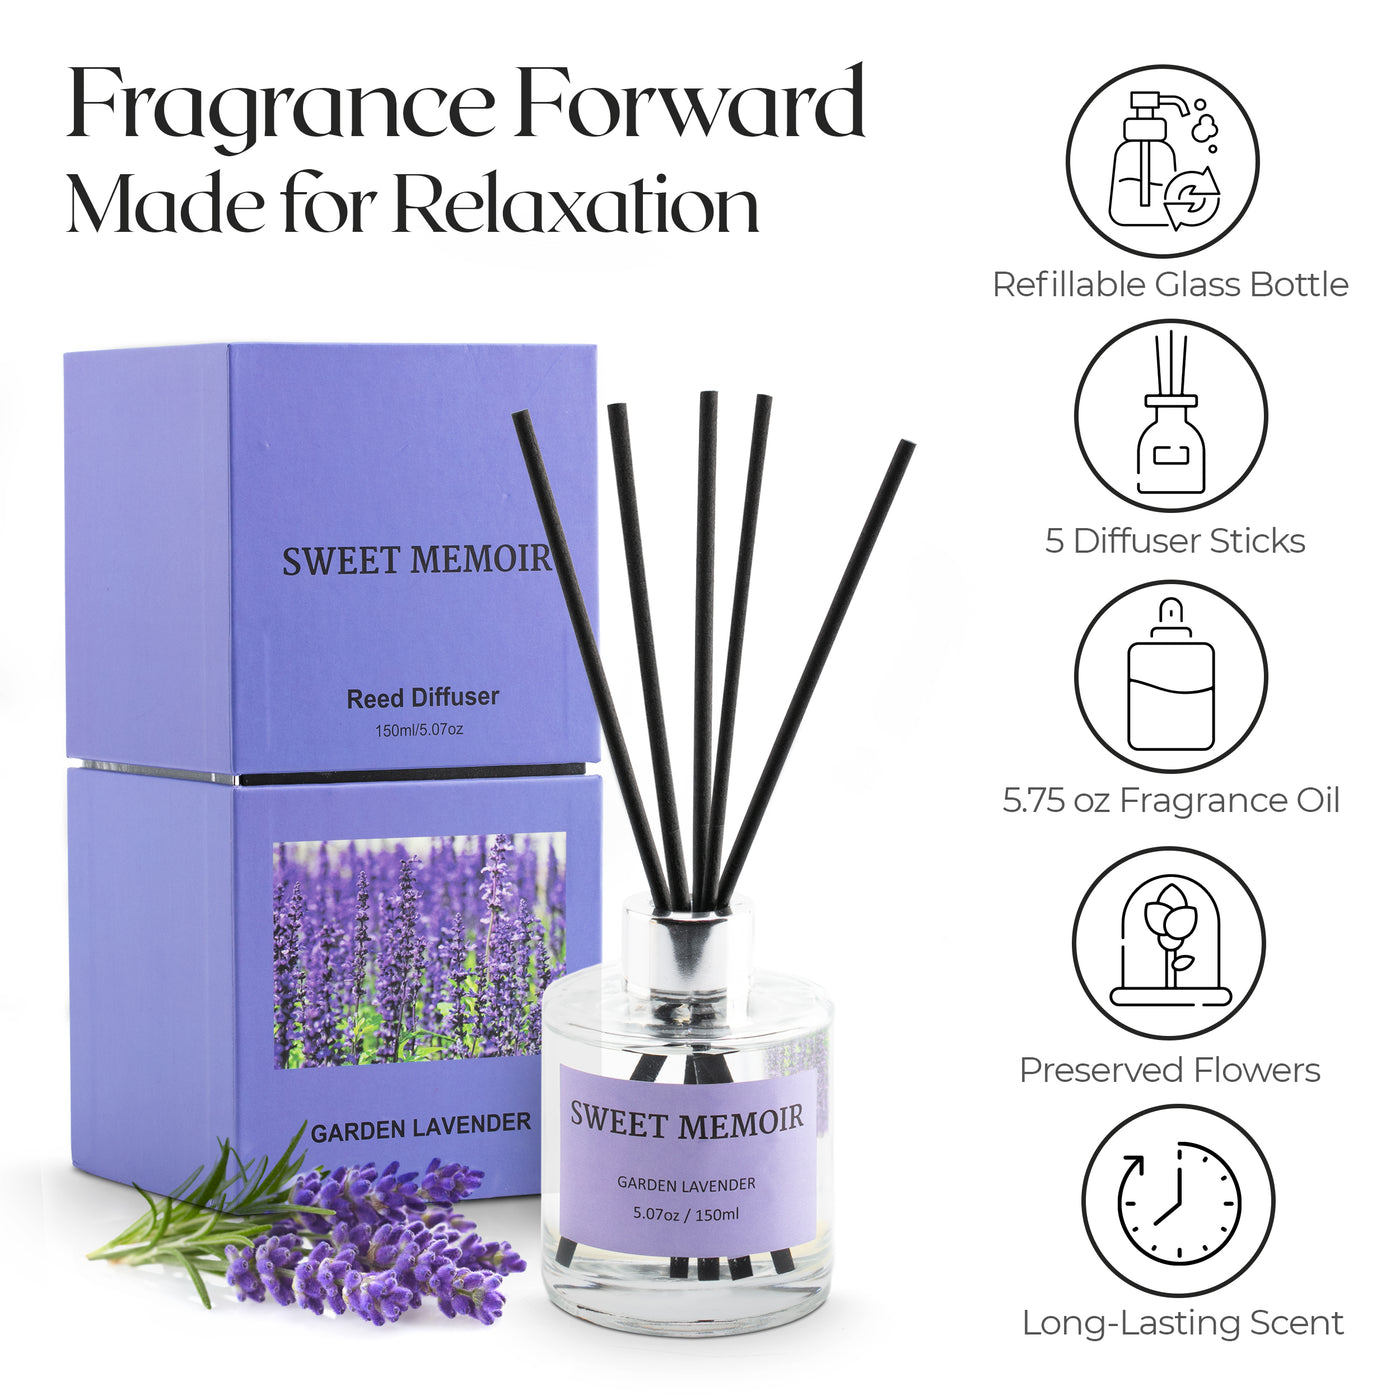 Detailed infographic highlighting the features of Sweet Memoir reed diffusers, including the fragrance intensity, oil volume, and long-lasting scent.